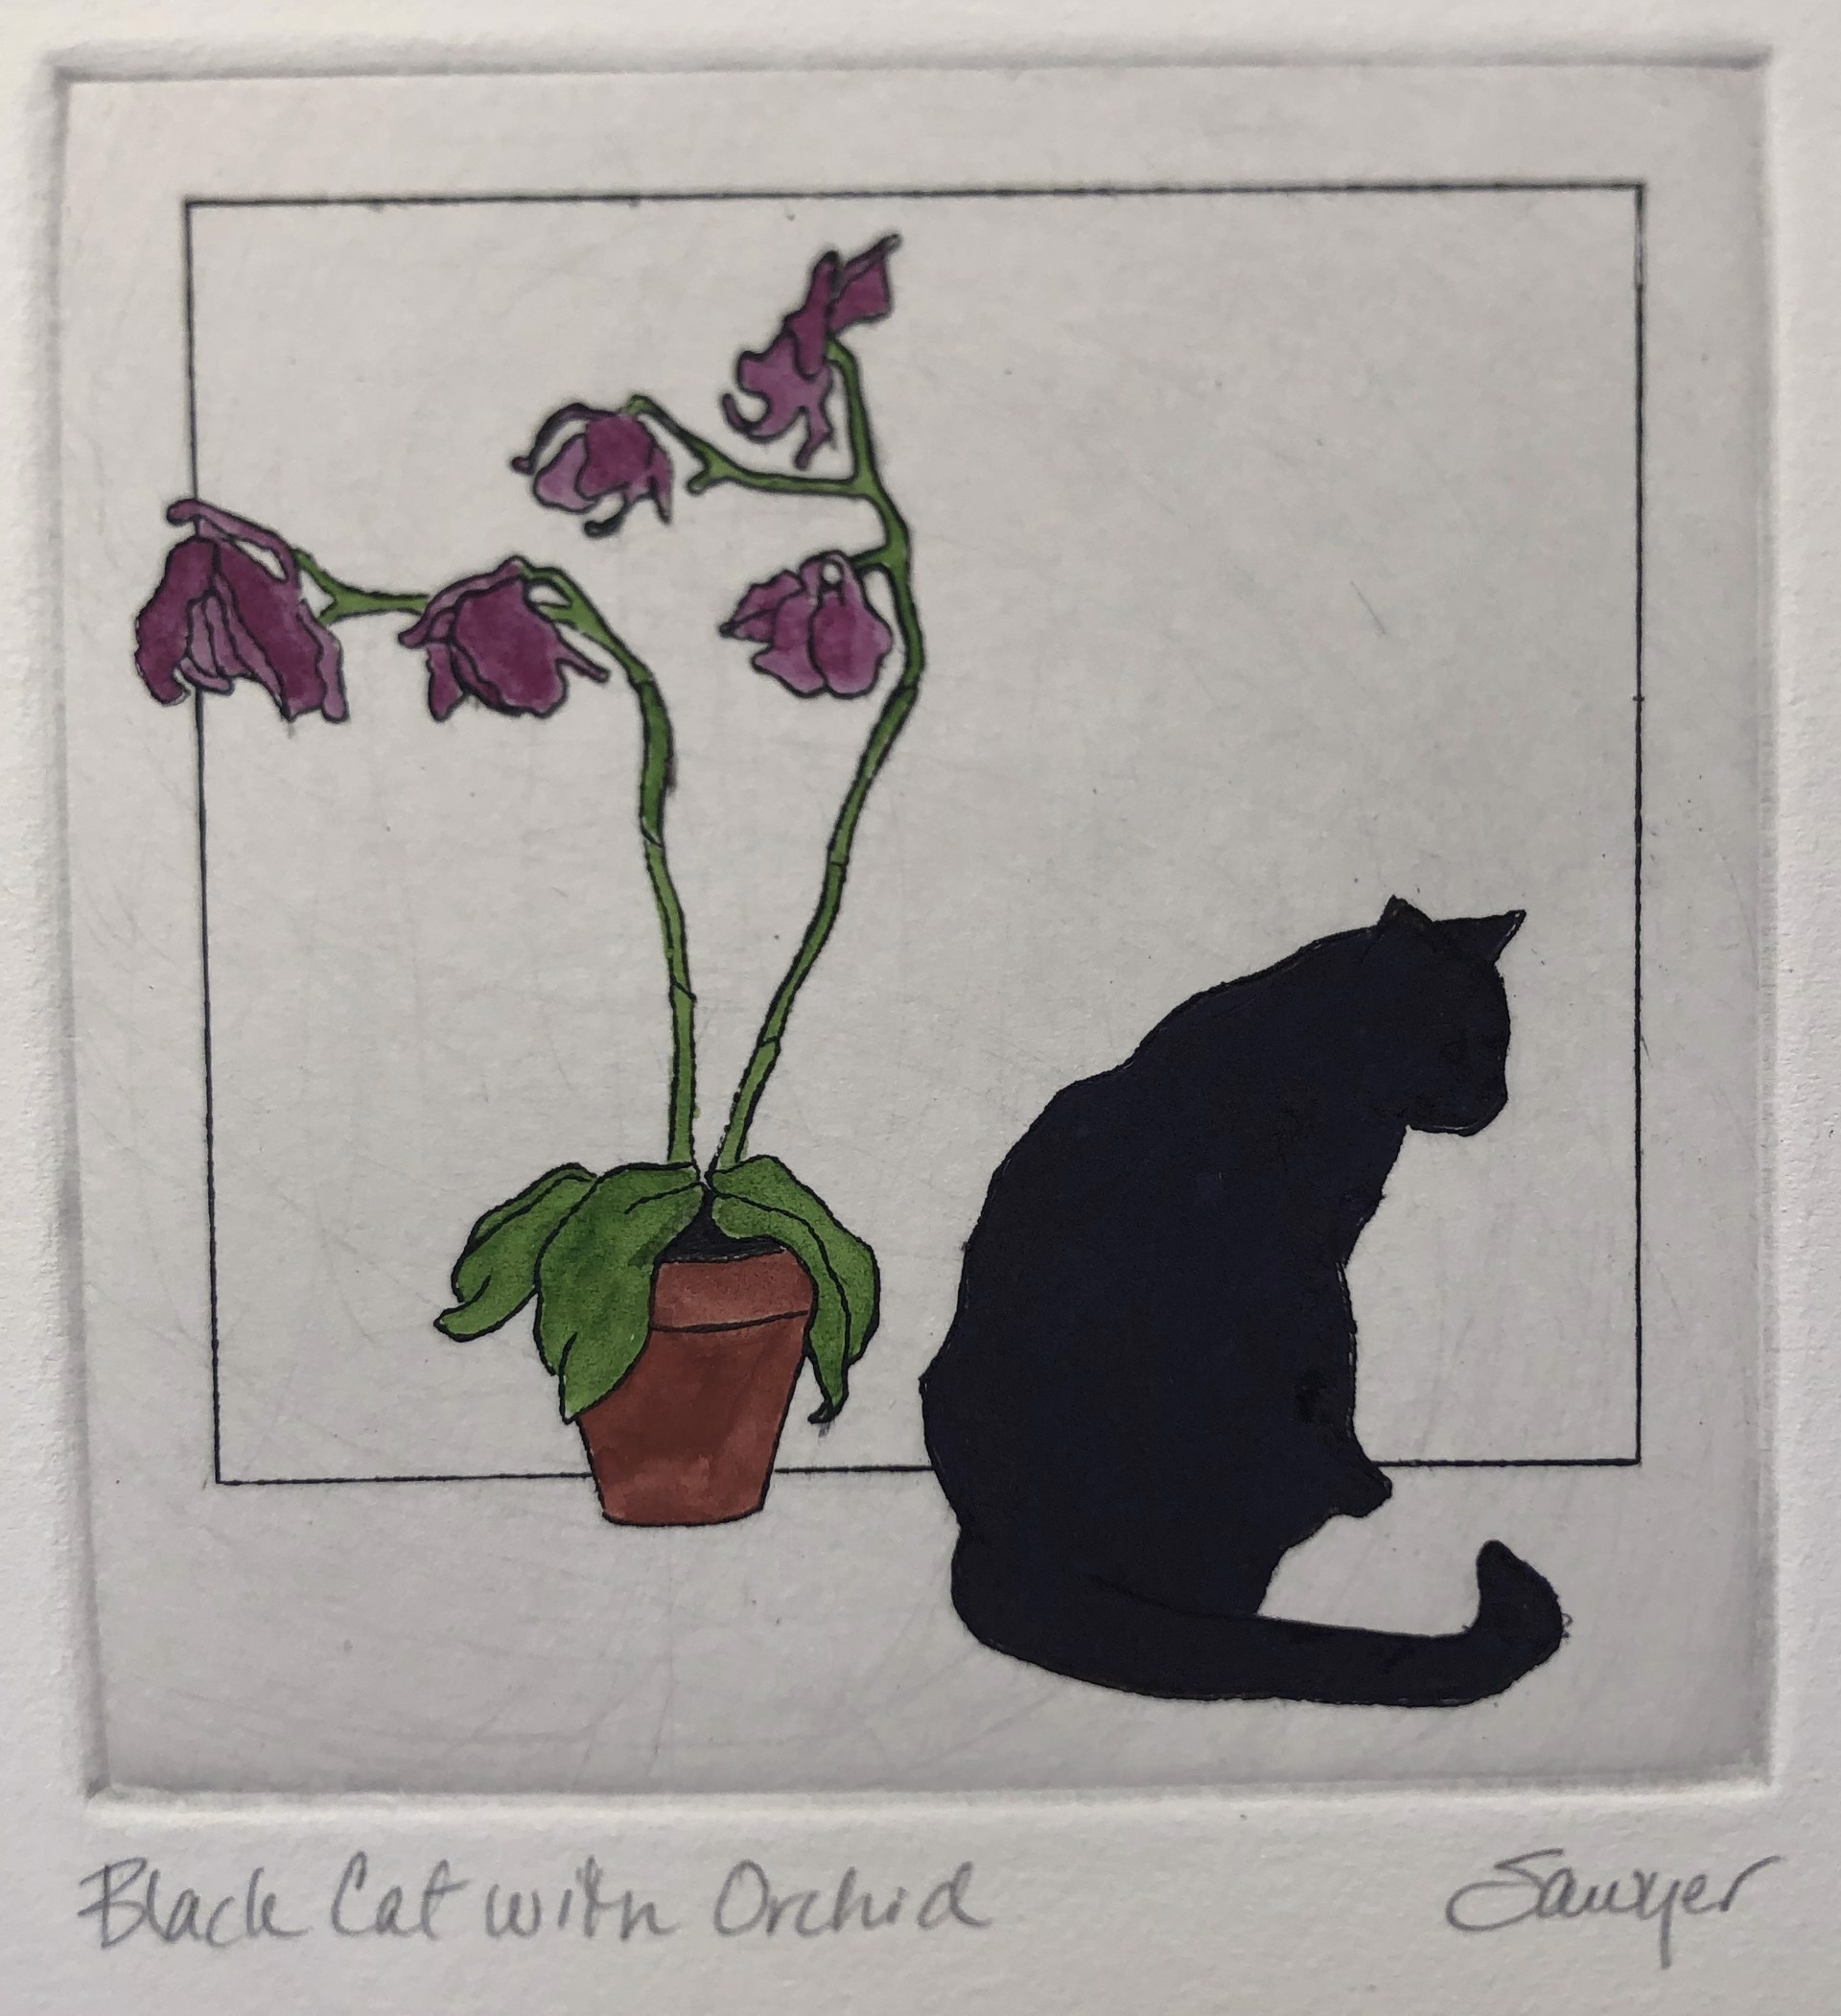 Black Cat with Orchid (unframed) by Anne Sawyer